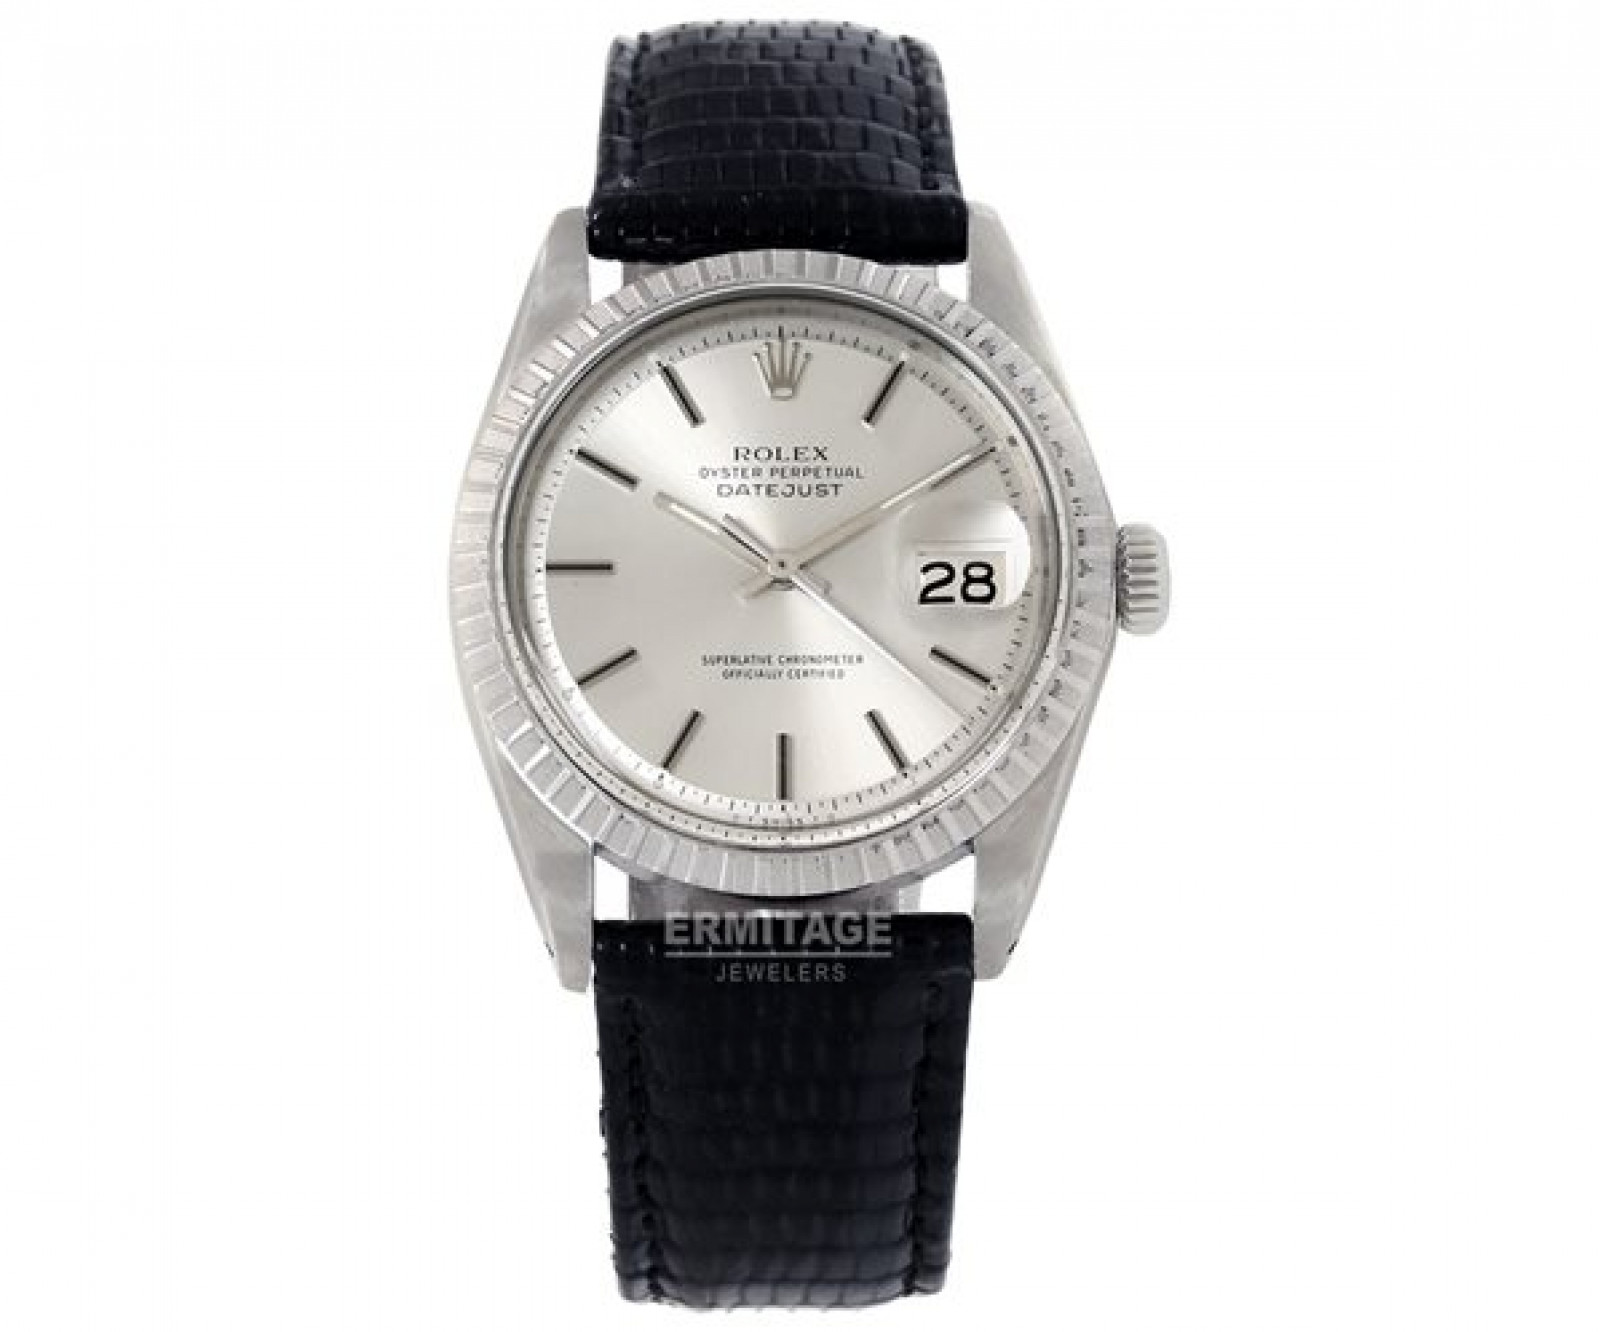 Rolex Oyster Perpetual Datejust 1601 Steel